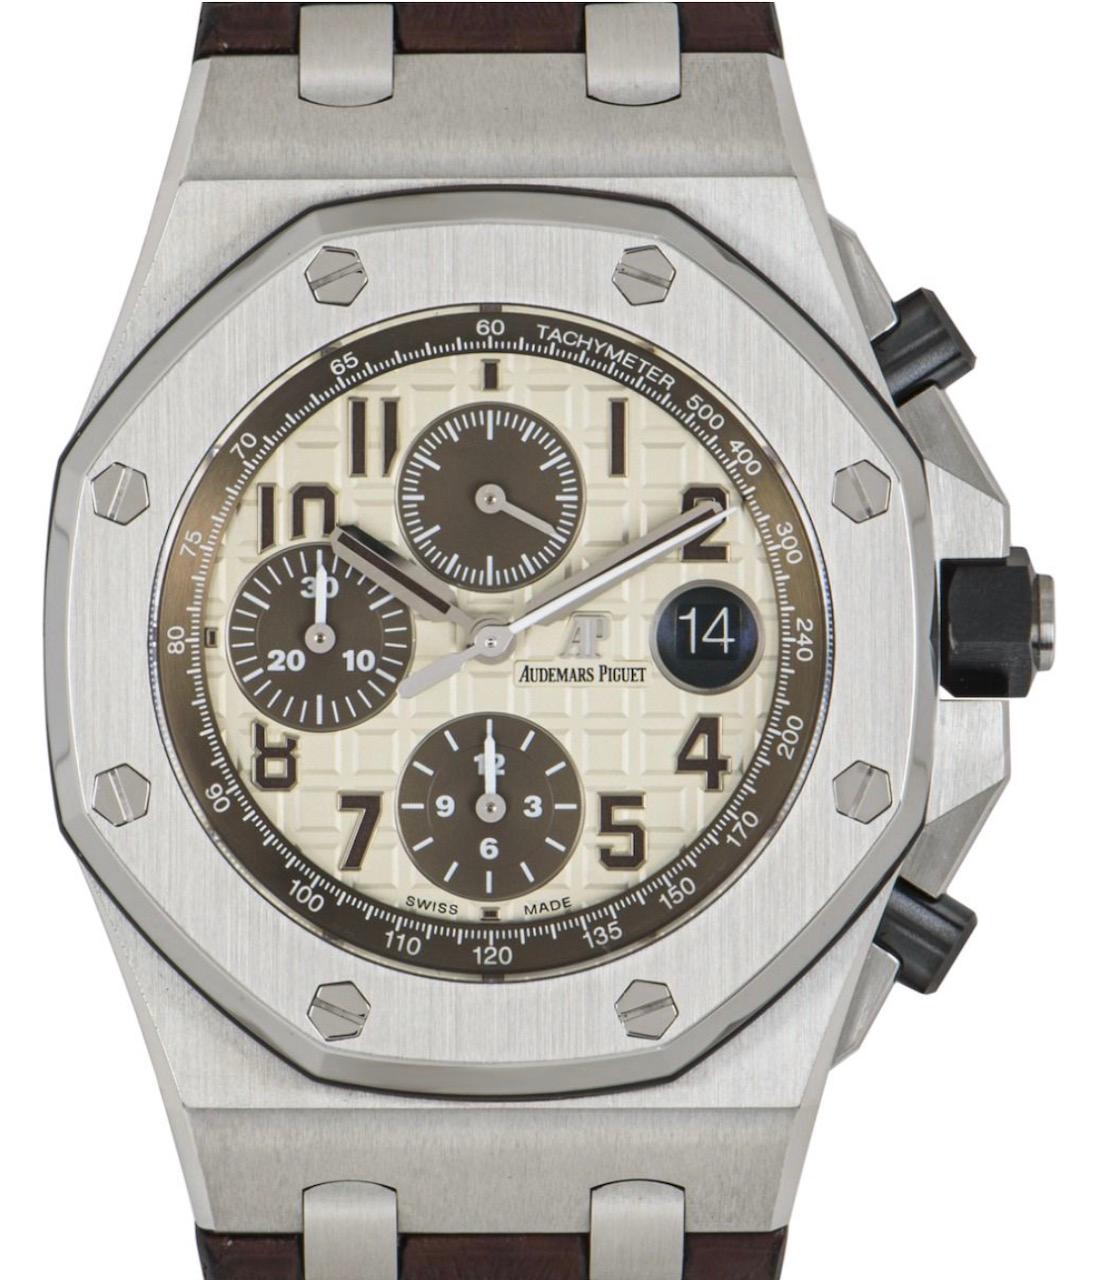 A 42mm men's Royal Oak Offshore Safari, crafted in stainless steel by Audemars Piguet. Features an ivory toned dial with a mega tapisserie pattern, 3 brown sub dials displaying a 60 second, 30 minute and 12 hour markers and a stainless steel fixed